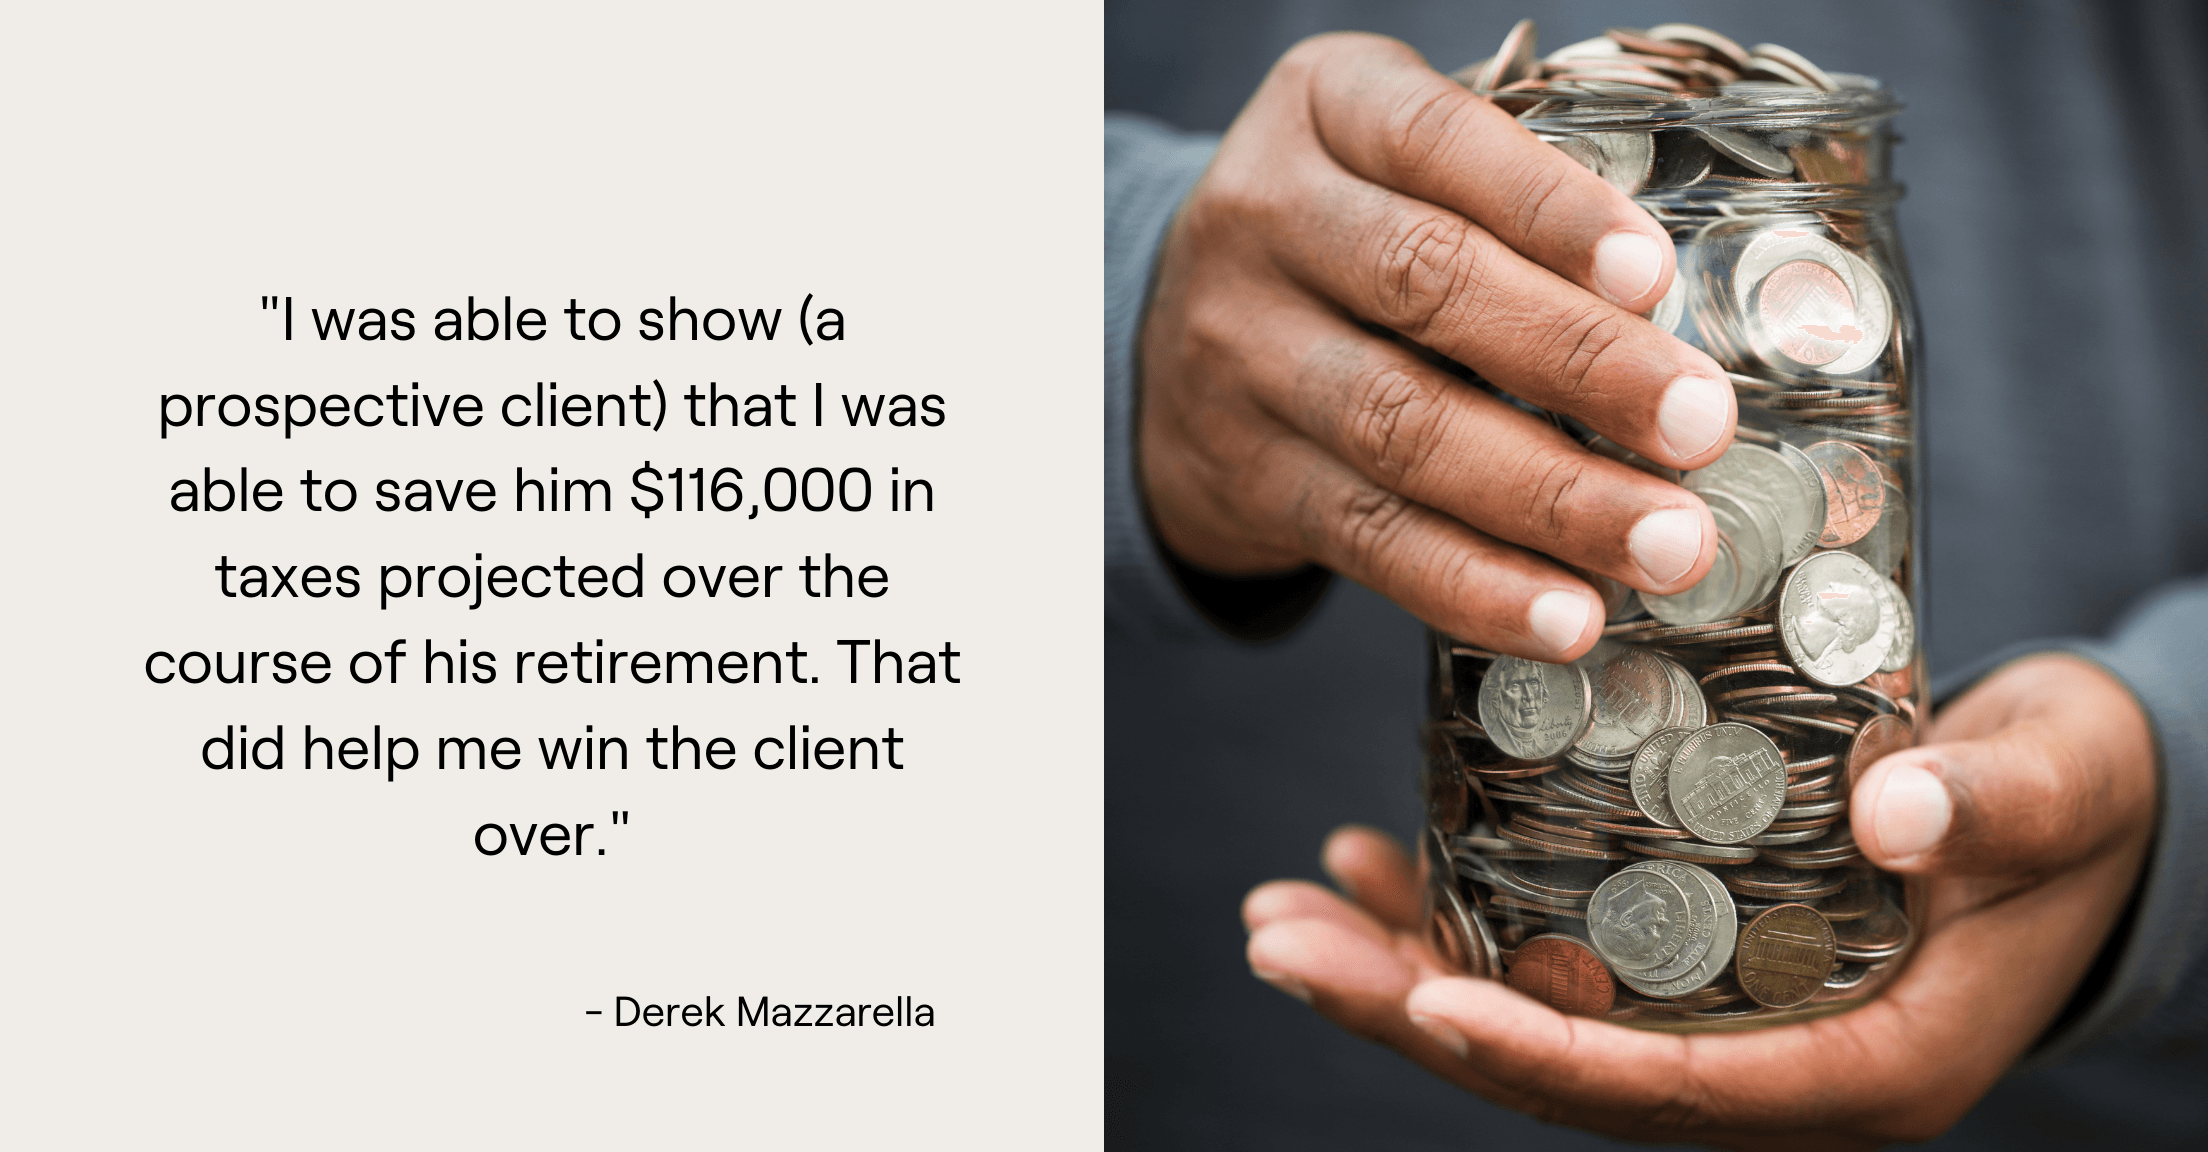 Person's hands holding jar of money and advisor Derek Mazzarella quote, "I was able to show (a prospective client) that I was able to save him $116,000 in taxes projected over the course of his retirement. That did help me win the client over."